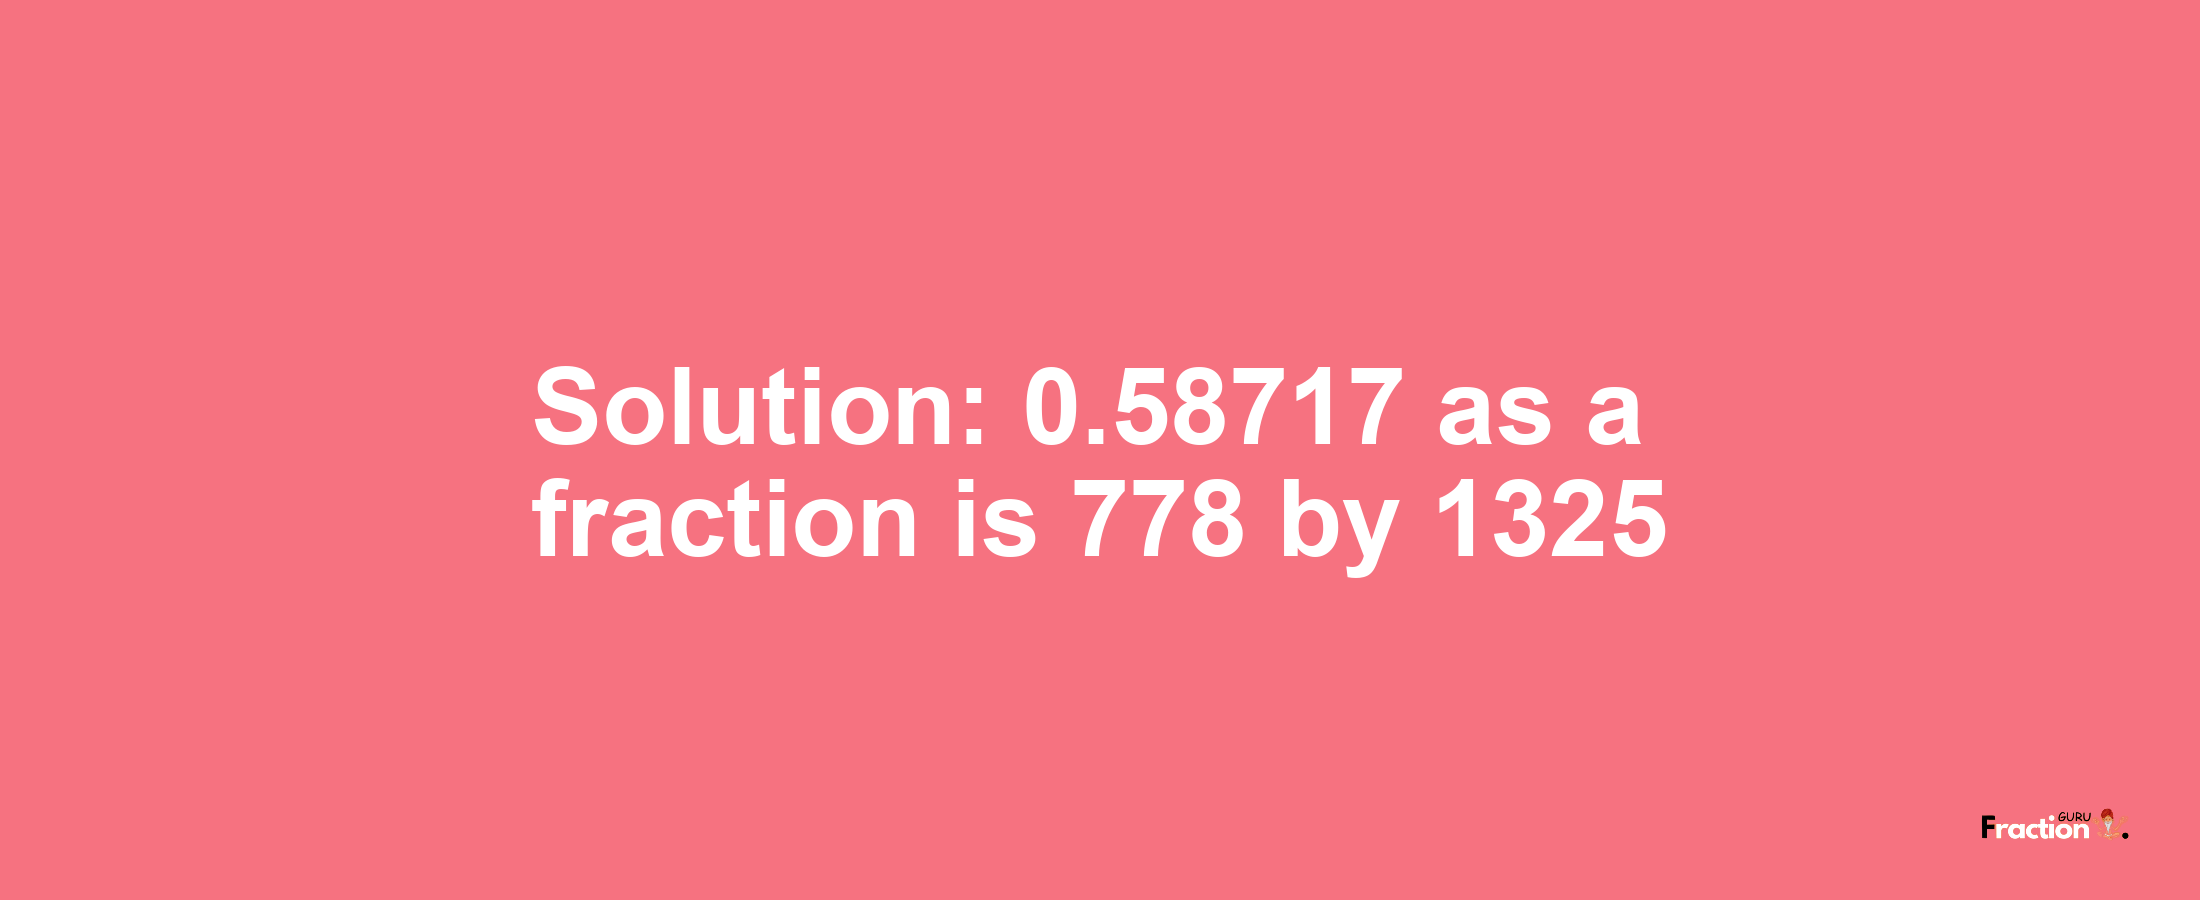 Solution:0.58717 as a fraction is 778/1325